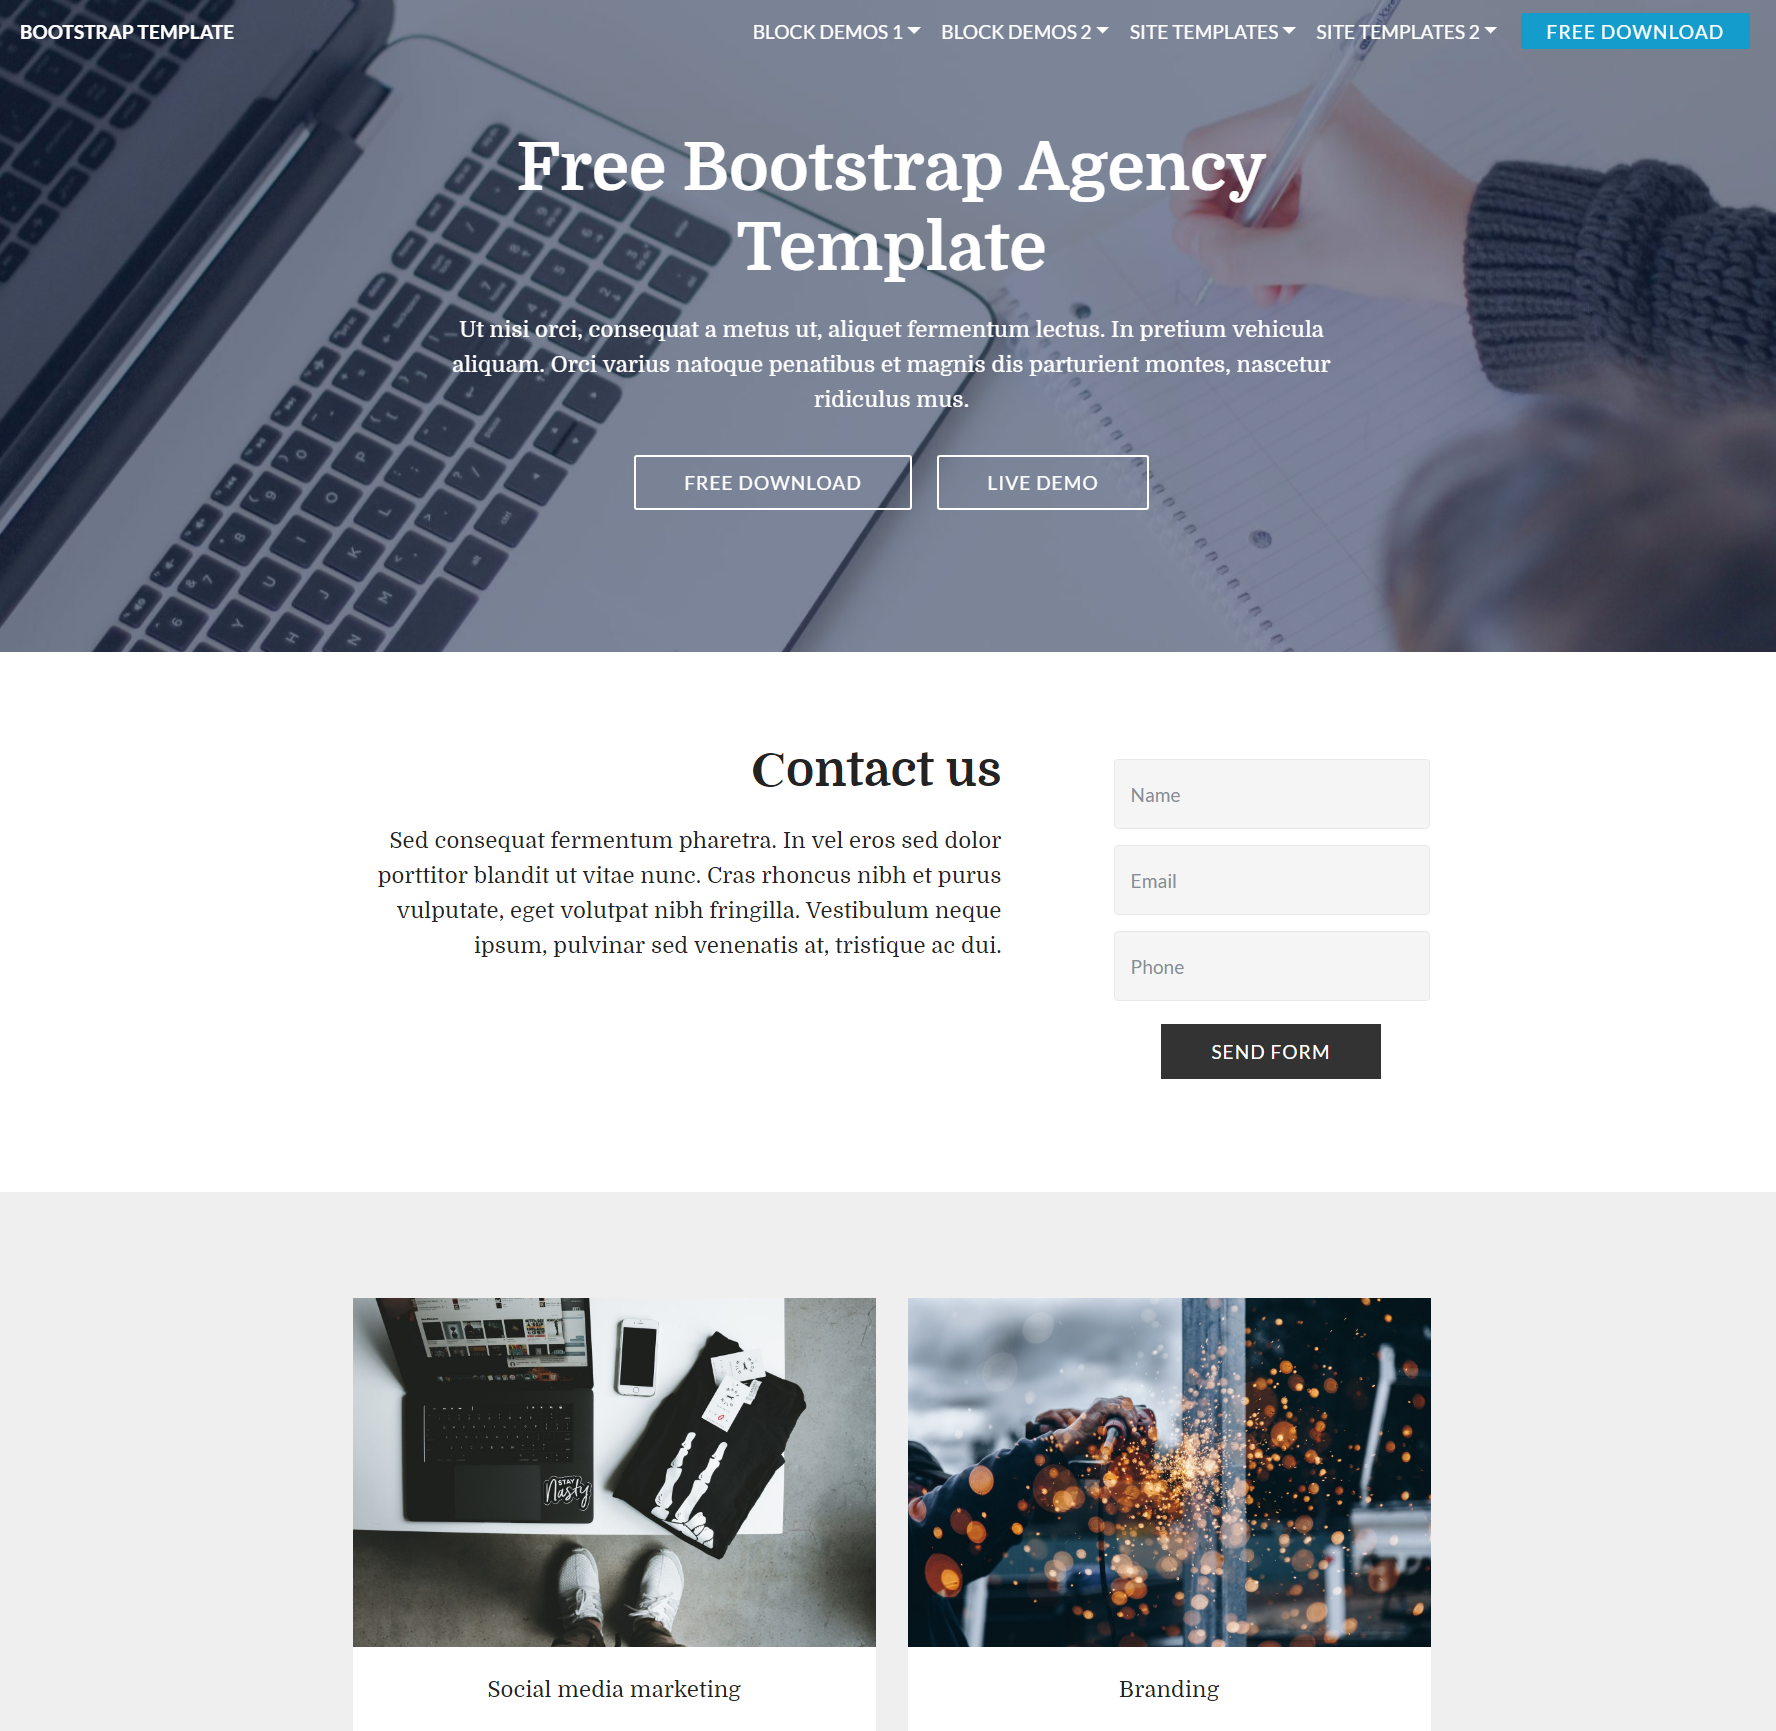 Free Download Bootstrap Agency Templates